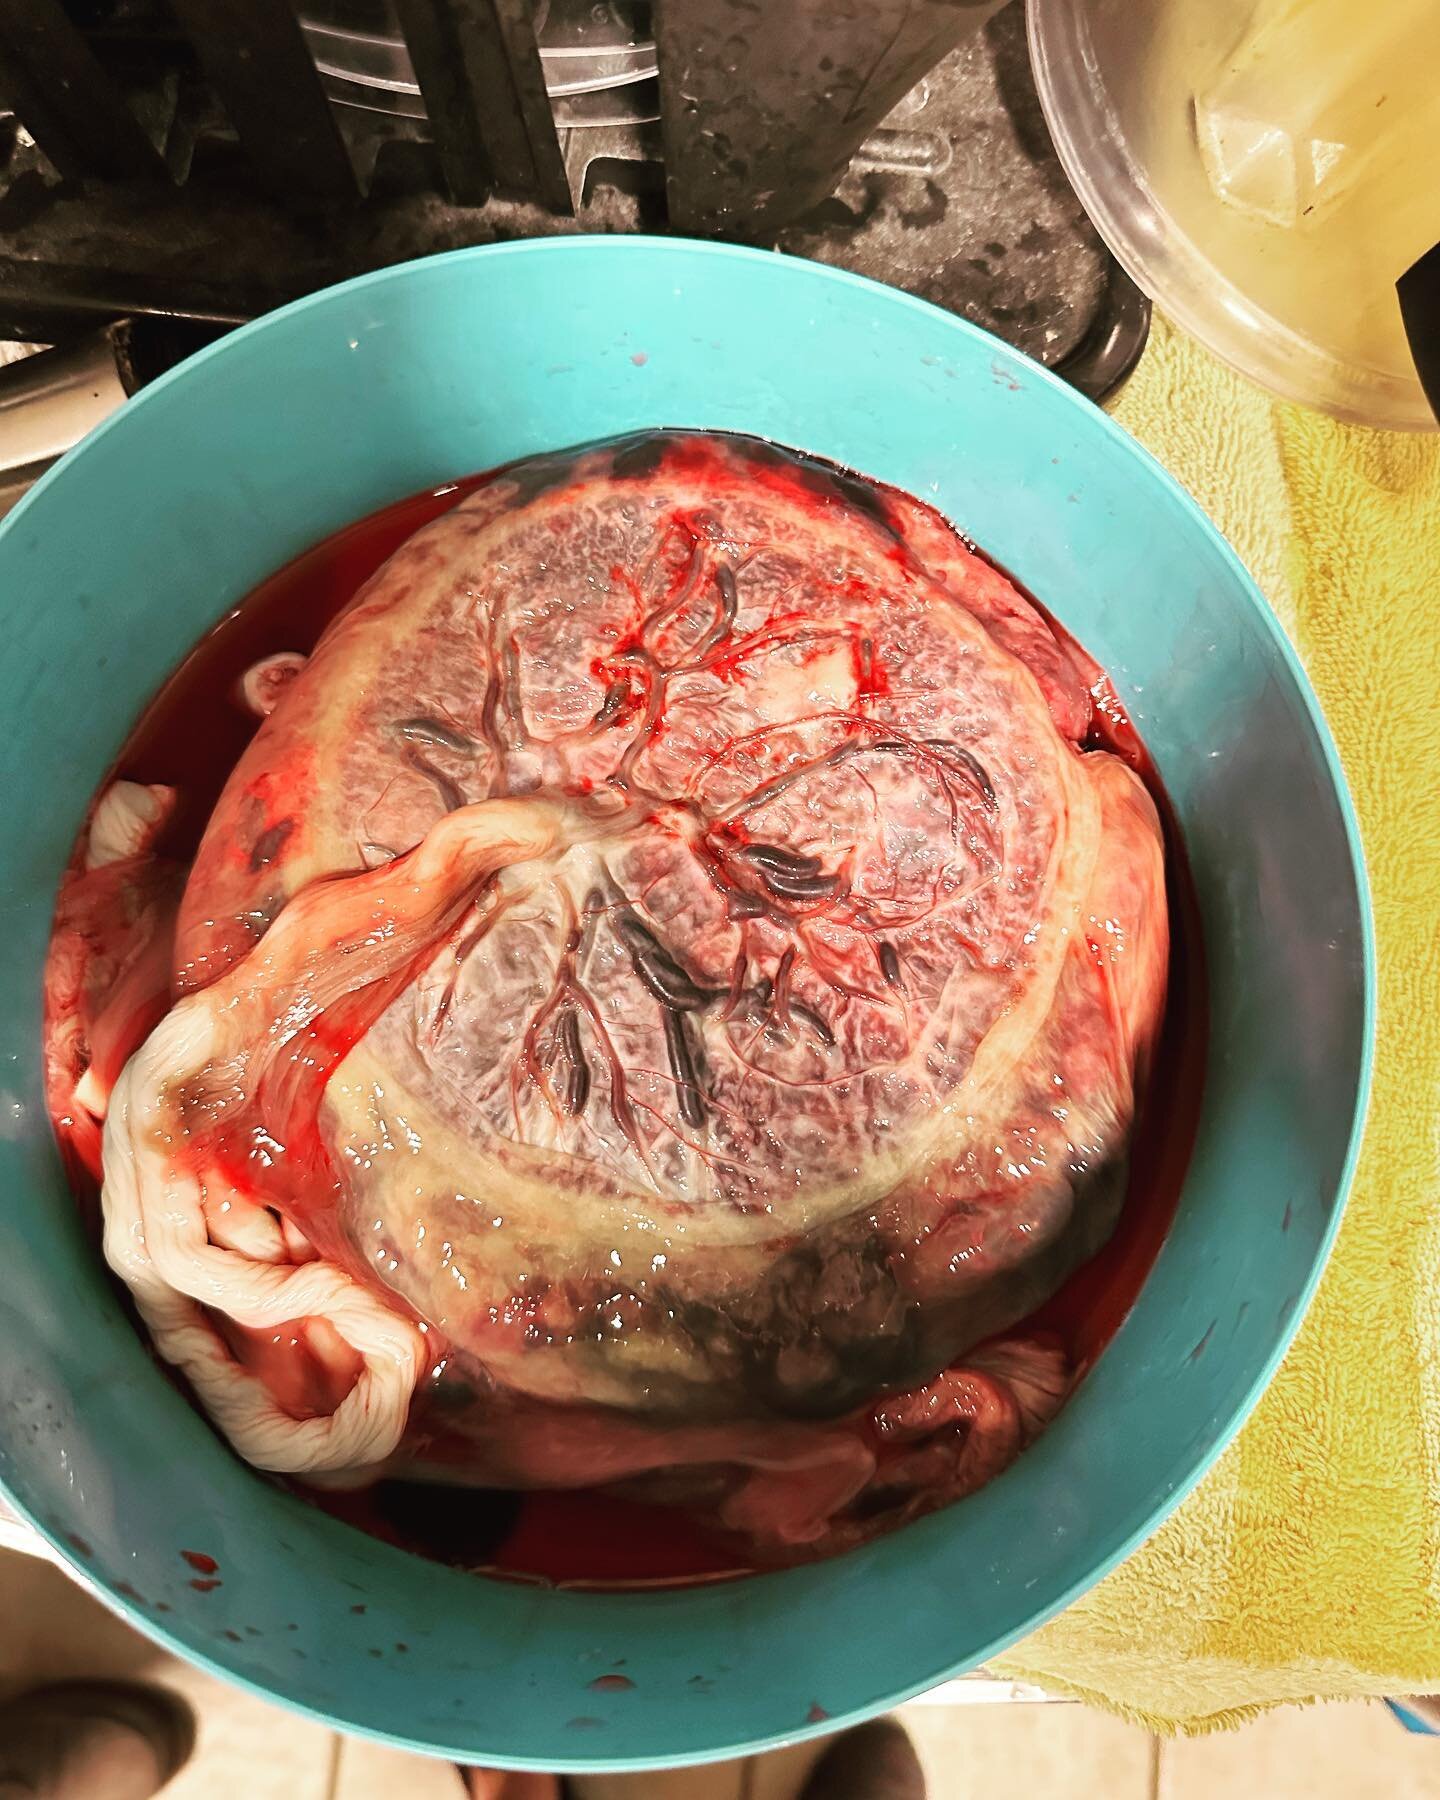 This was the most significant circumvallate placenta I have ever seen.  The mother is a very healthy eater and had no other issues. As is consistent with this anomaly, she presented with first and second trimester bleeding and baby was born early.  T